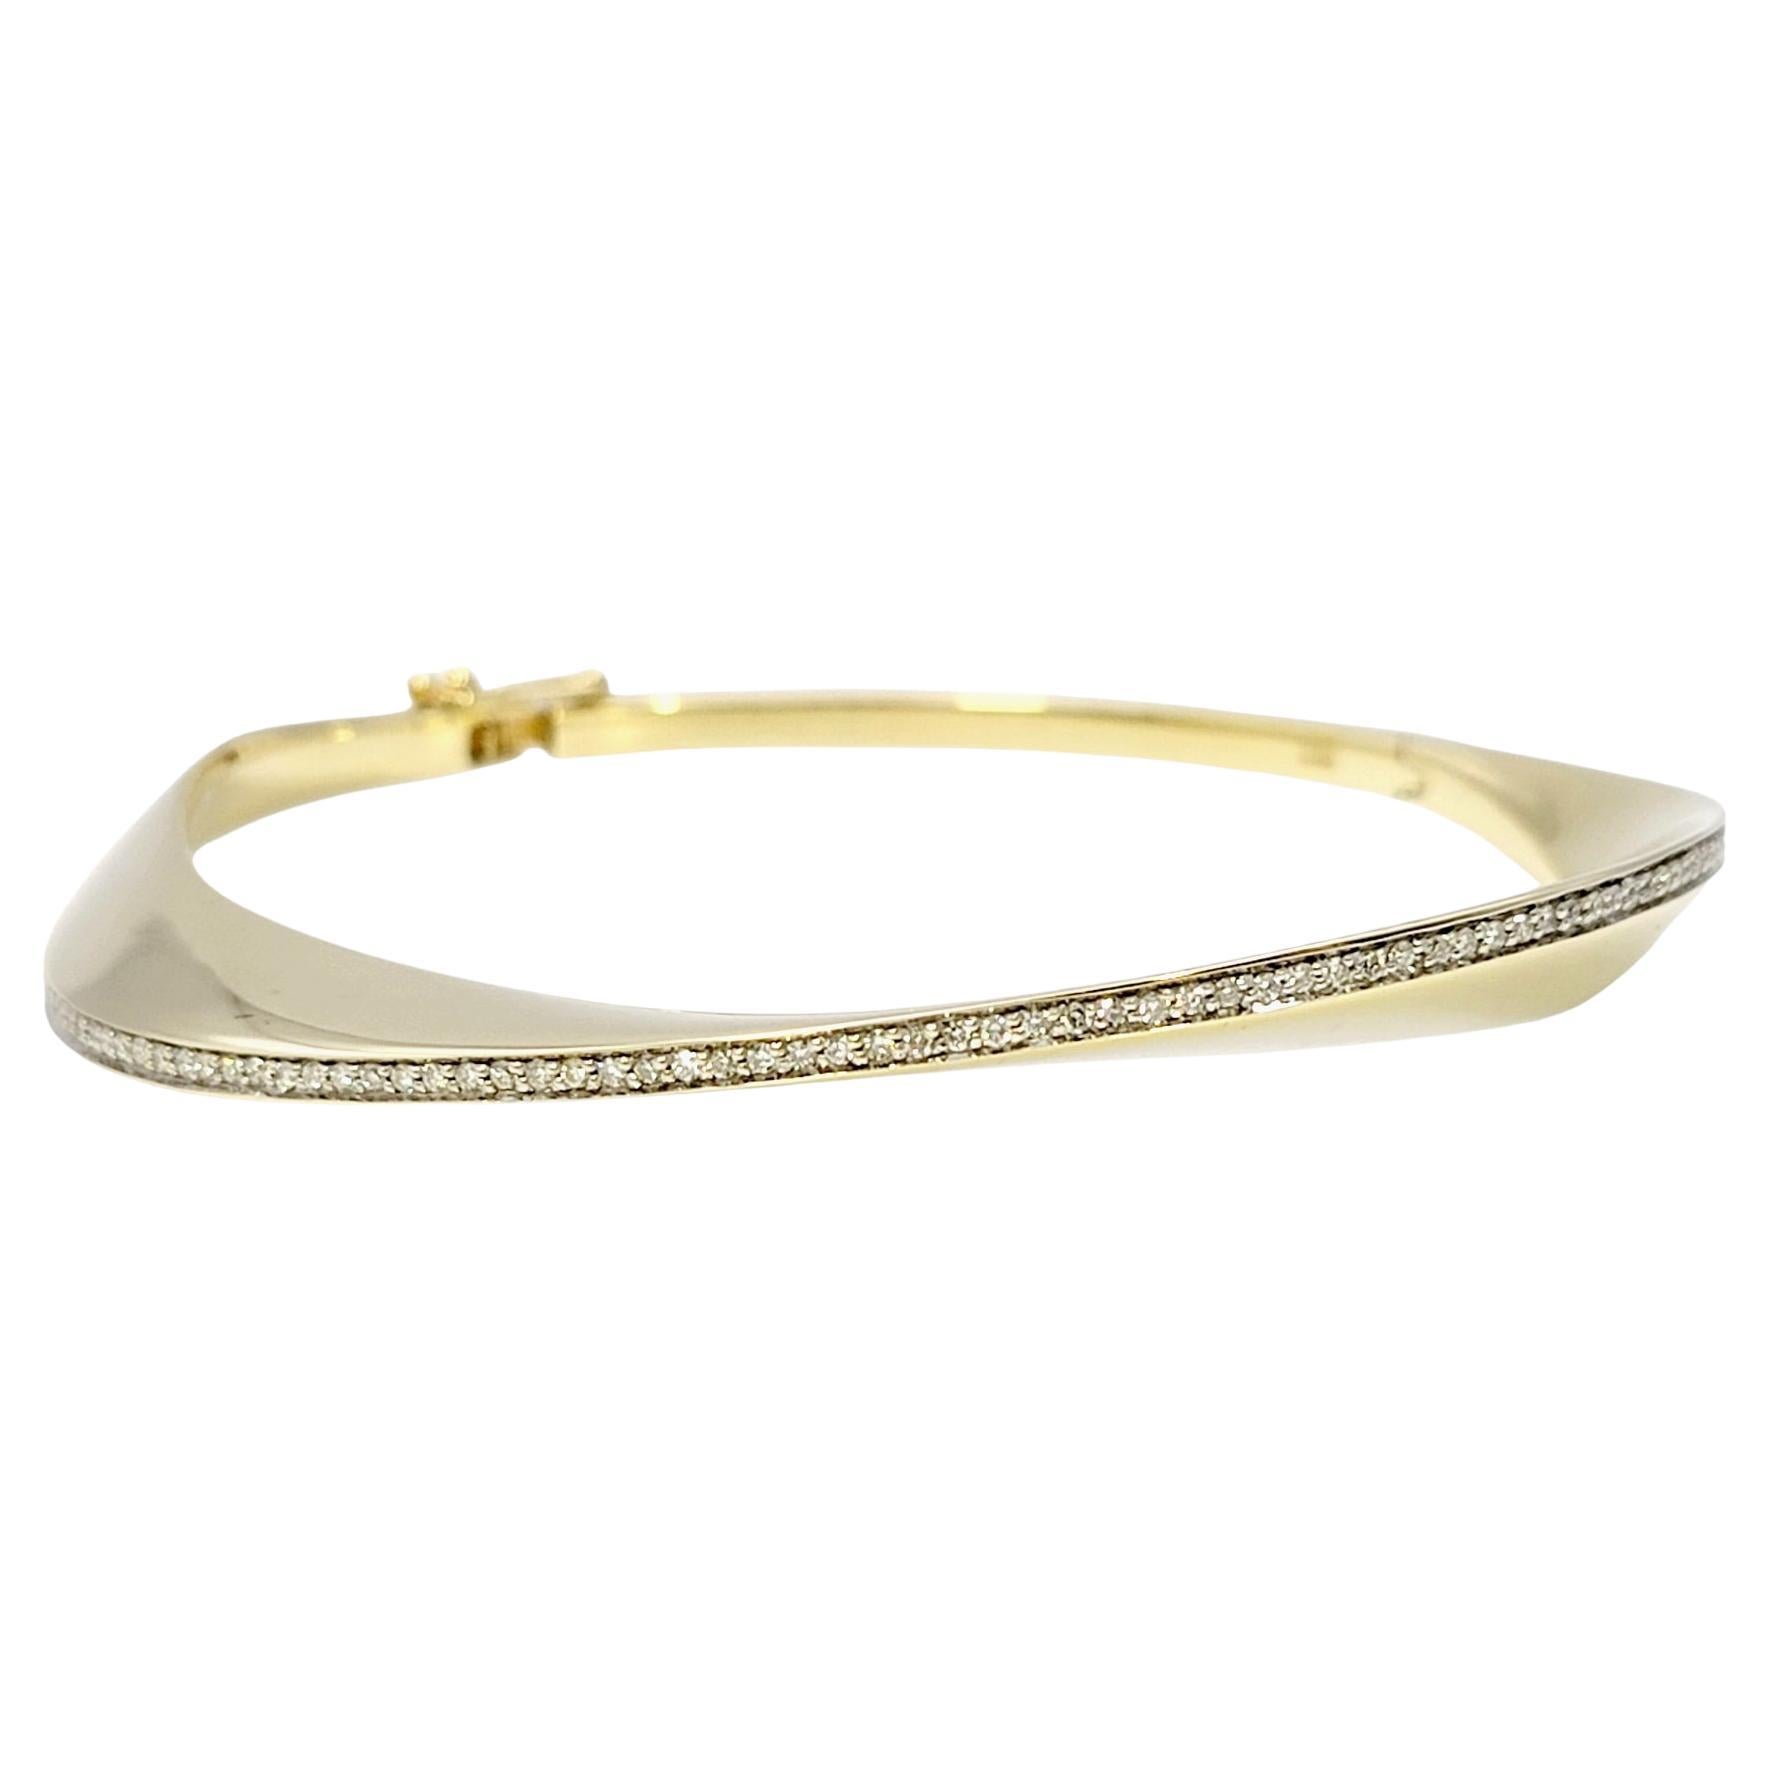 Uniquely designed contemporary bangle bracelet with sleek diamond wave design. This modern take on the classic bangle style will adorn your wrist with elegance and give a sophisticated, fashion-forward look that you will love.   

This beautiful